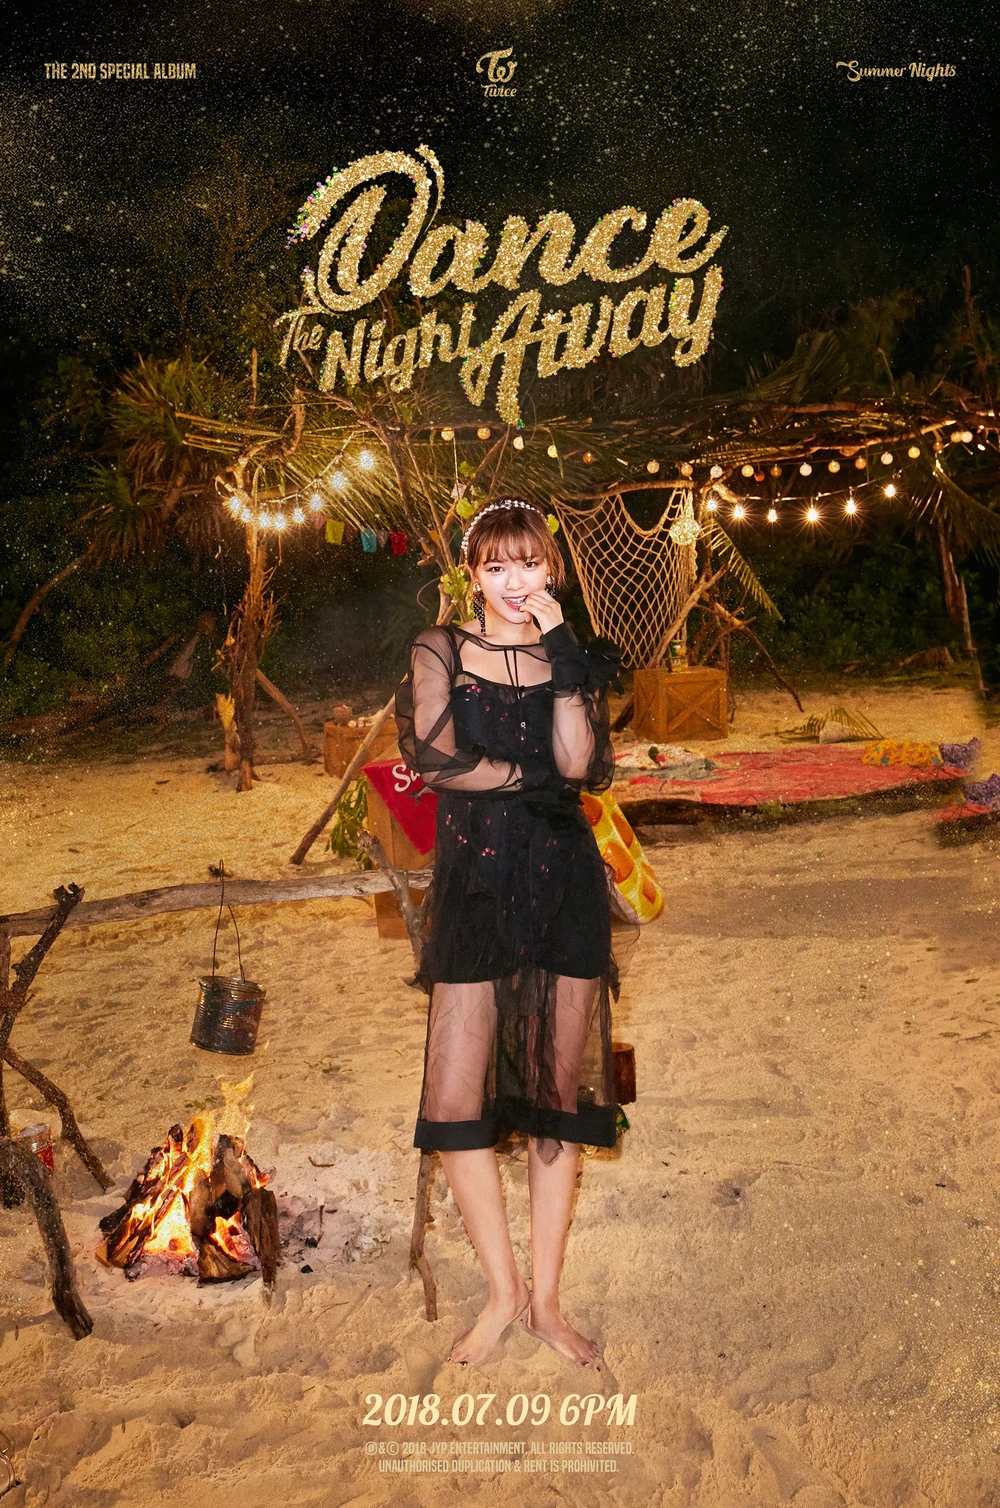 Twice Summer Nights Jeongyeon Concept Teaser Picture Image Photo Kpop K-Concept 2